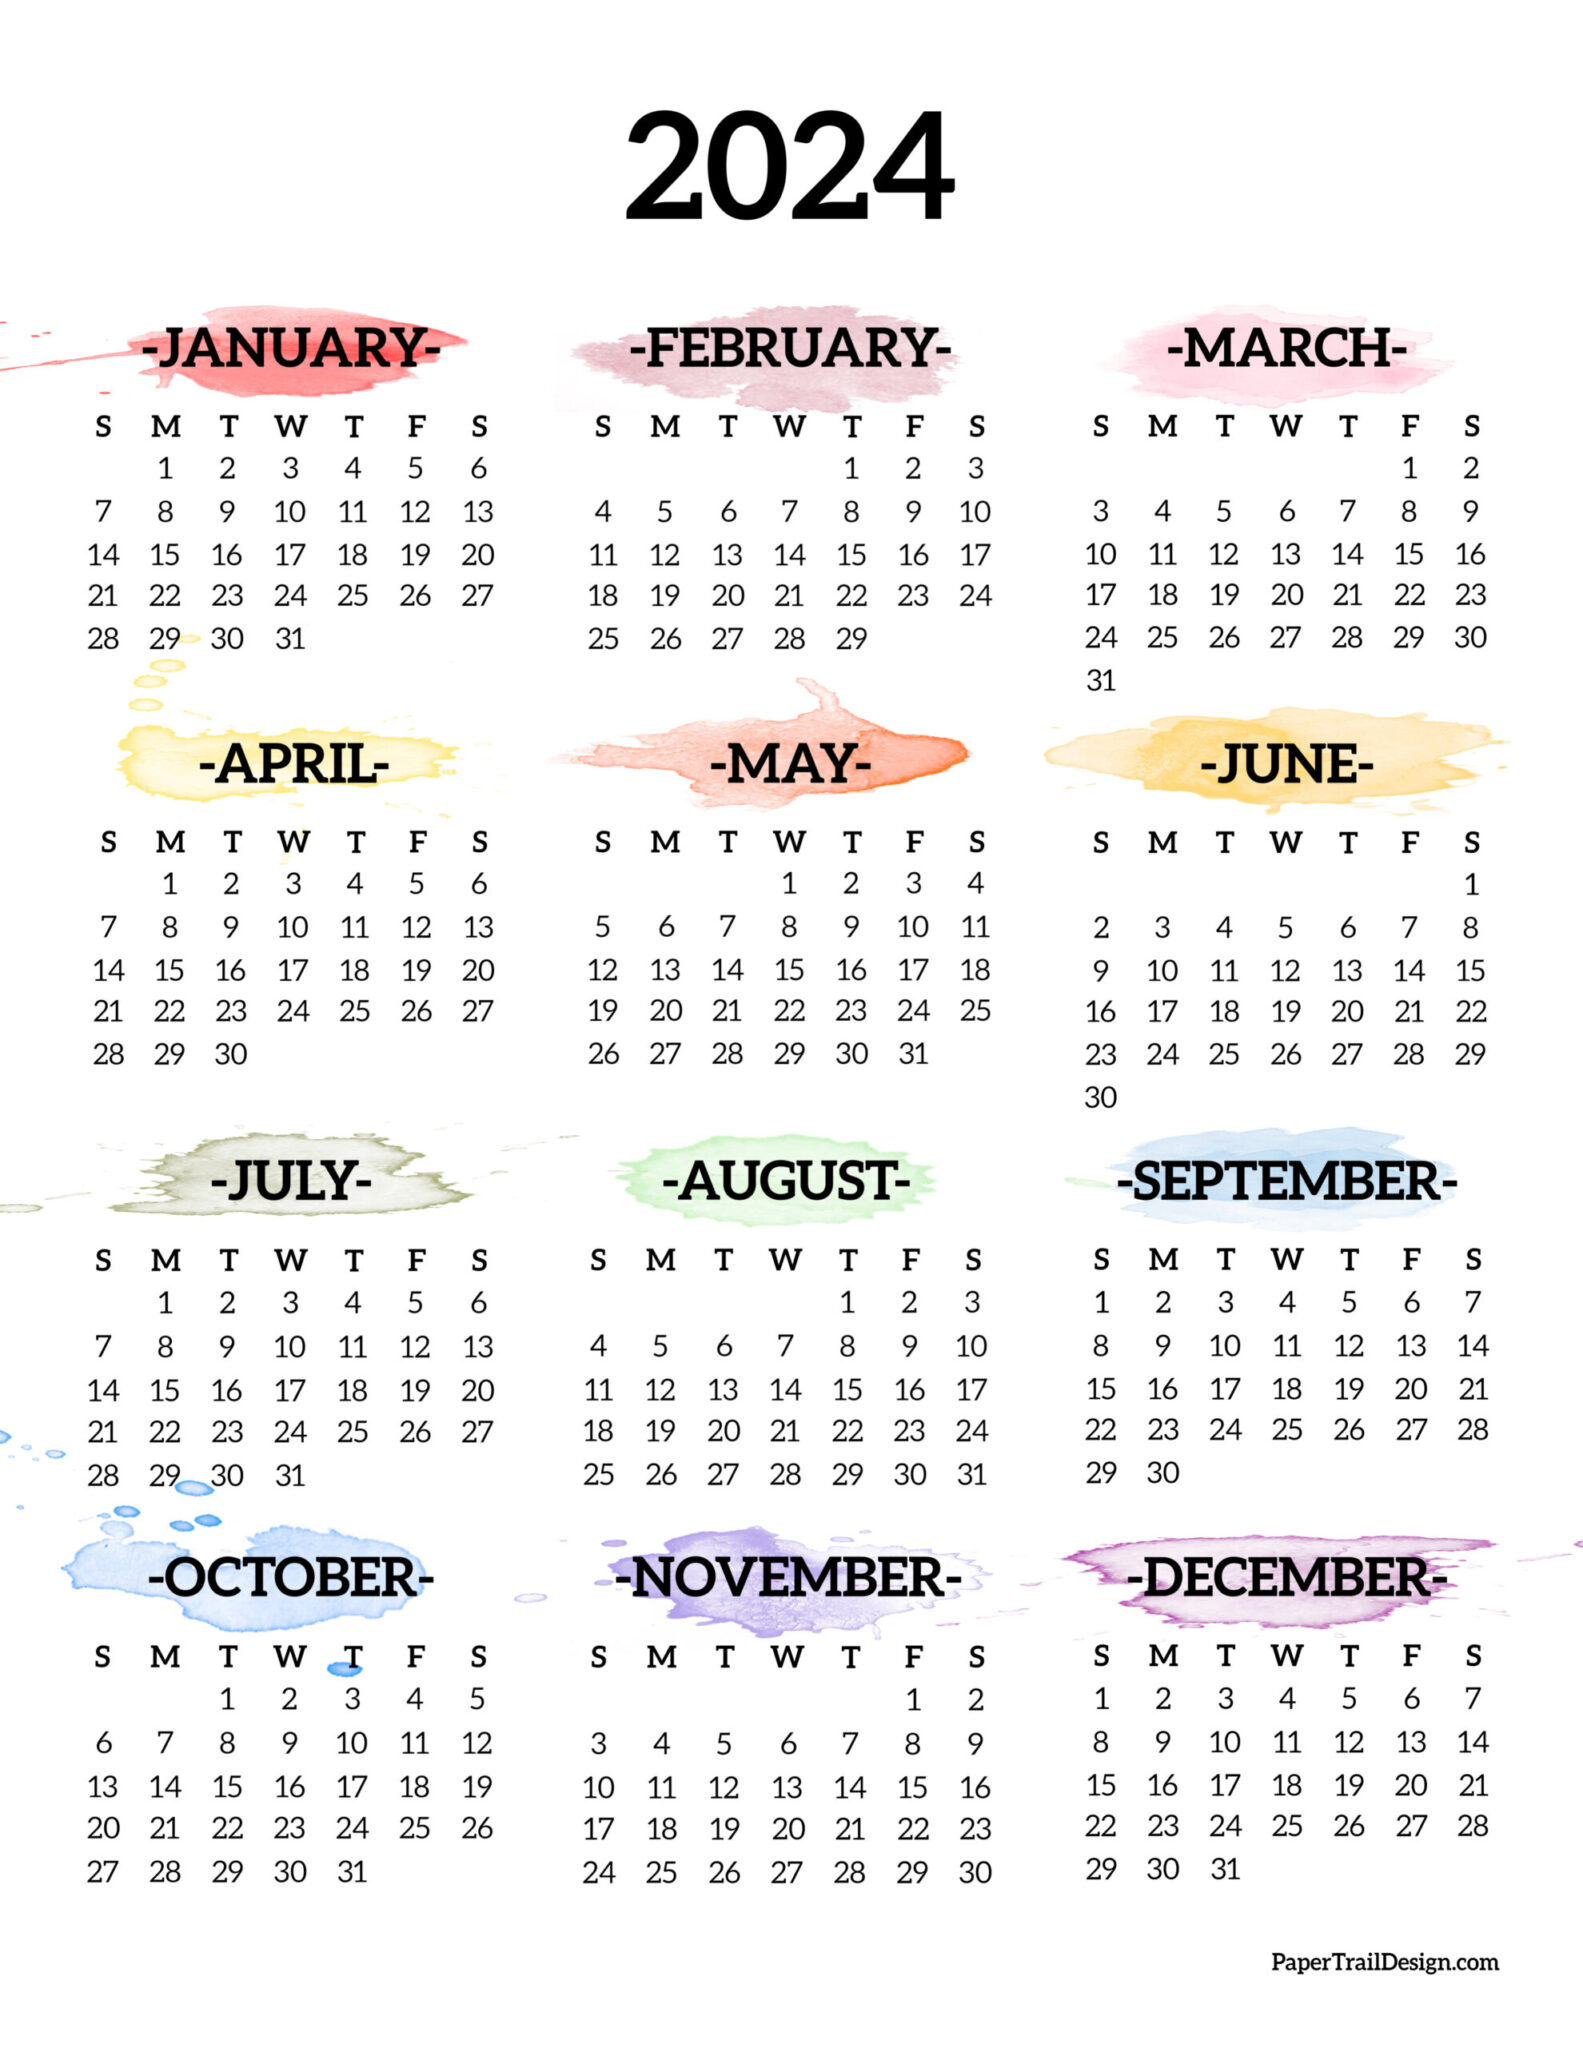 2024 One Page Calendar Watercolor 2 1583x2048 